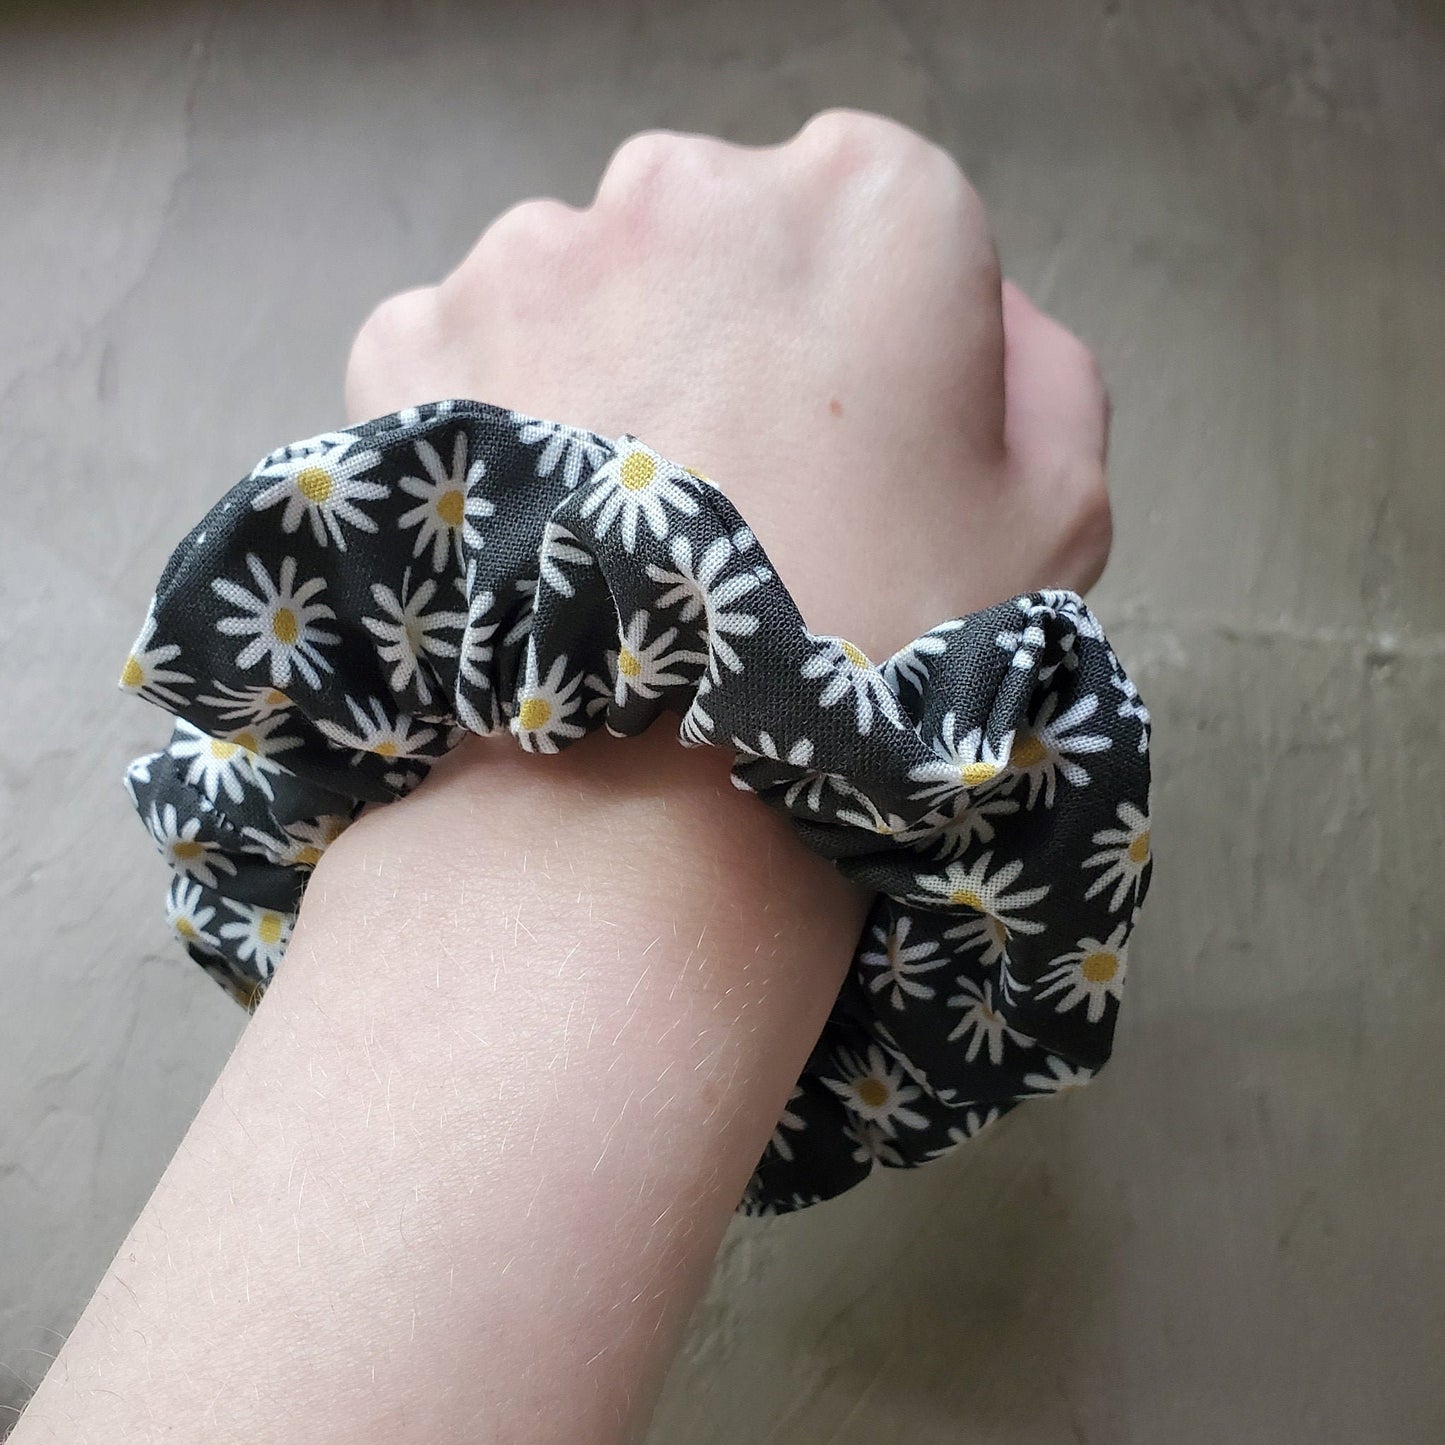 Scrunchie shown on my wrist for size reference. Fabric sticks out about an inch from the center of the scrunchie.